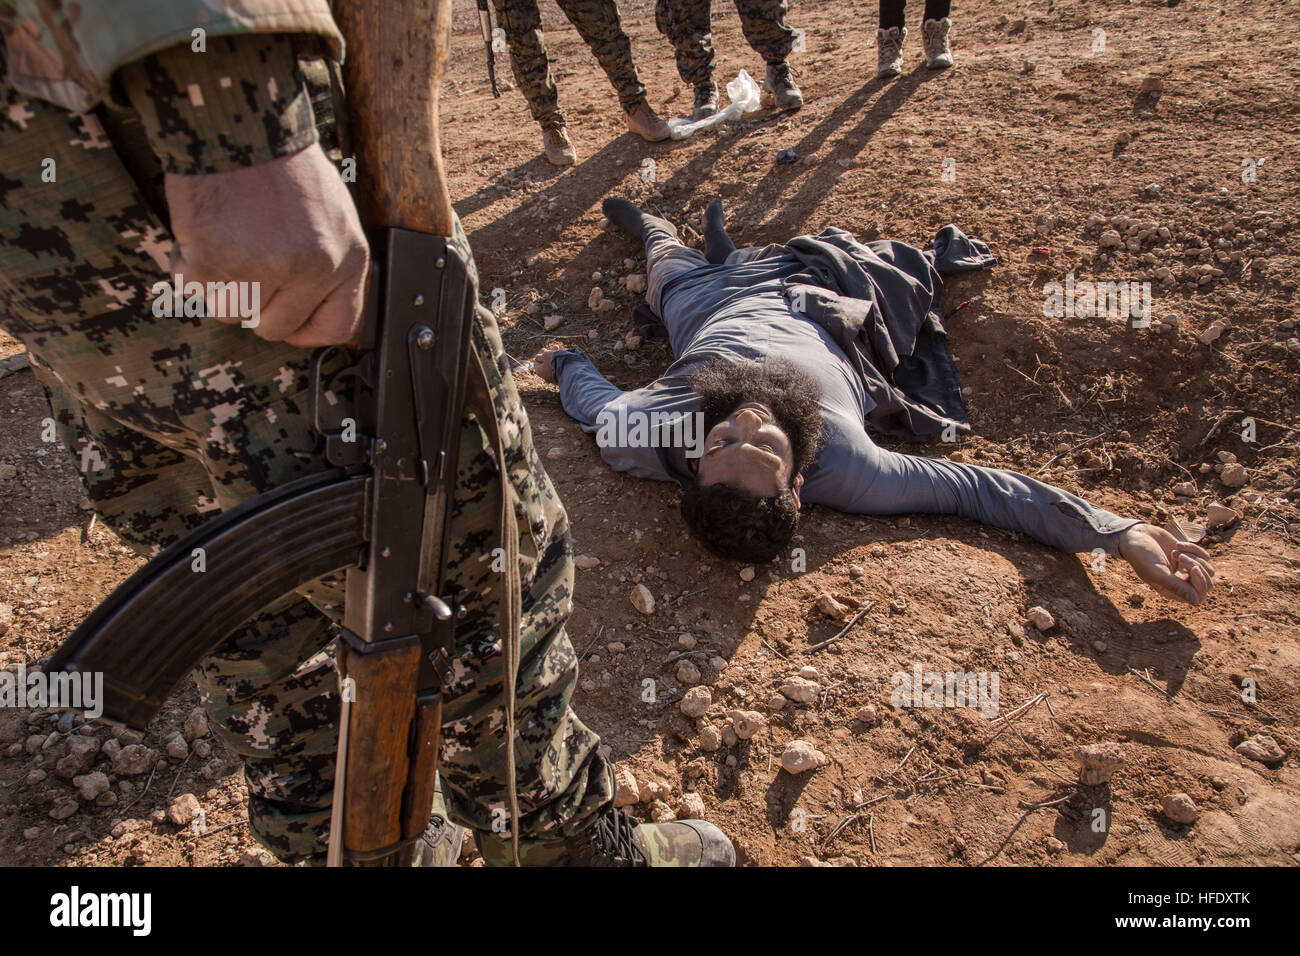 Going to Raqqa -  19/12/2016  -  Syria  -  SYRIA / ROJAVA / SHE BHER village - A dead body of a memeber of ISIS - the YPG platoon has just liberate the village from ISIS, this place is not far from Raqqa.   -  Chris Huby / Le Pictorium Stock Photo